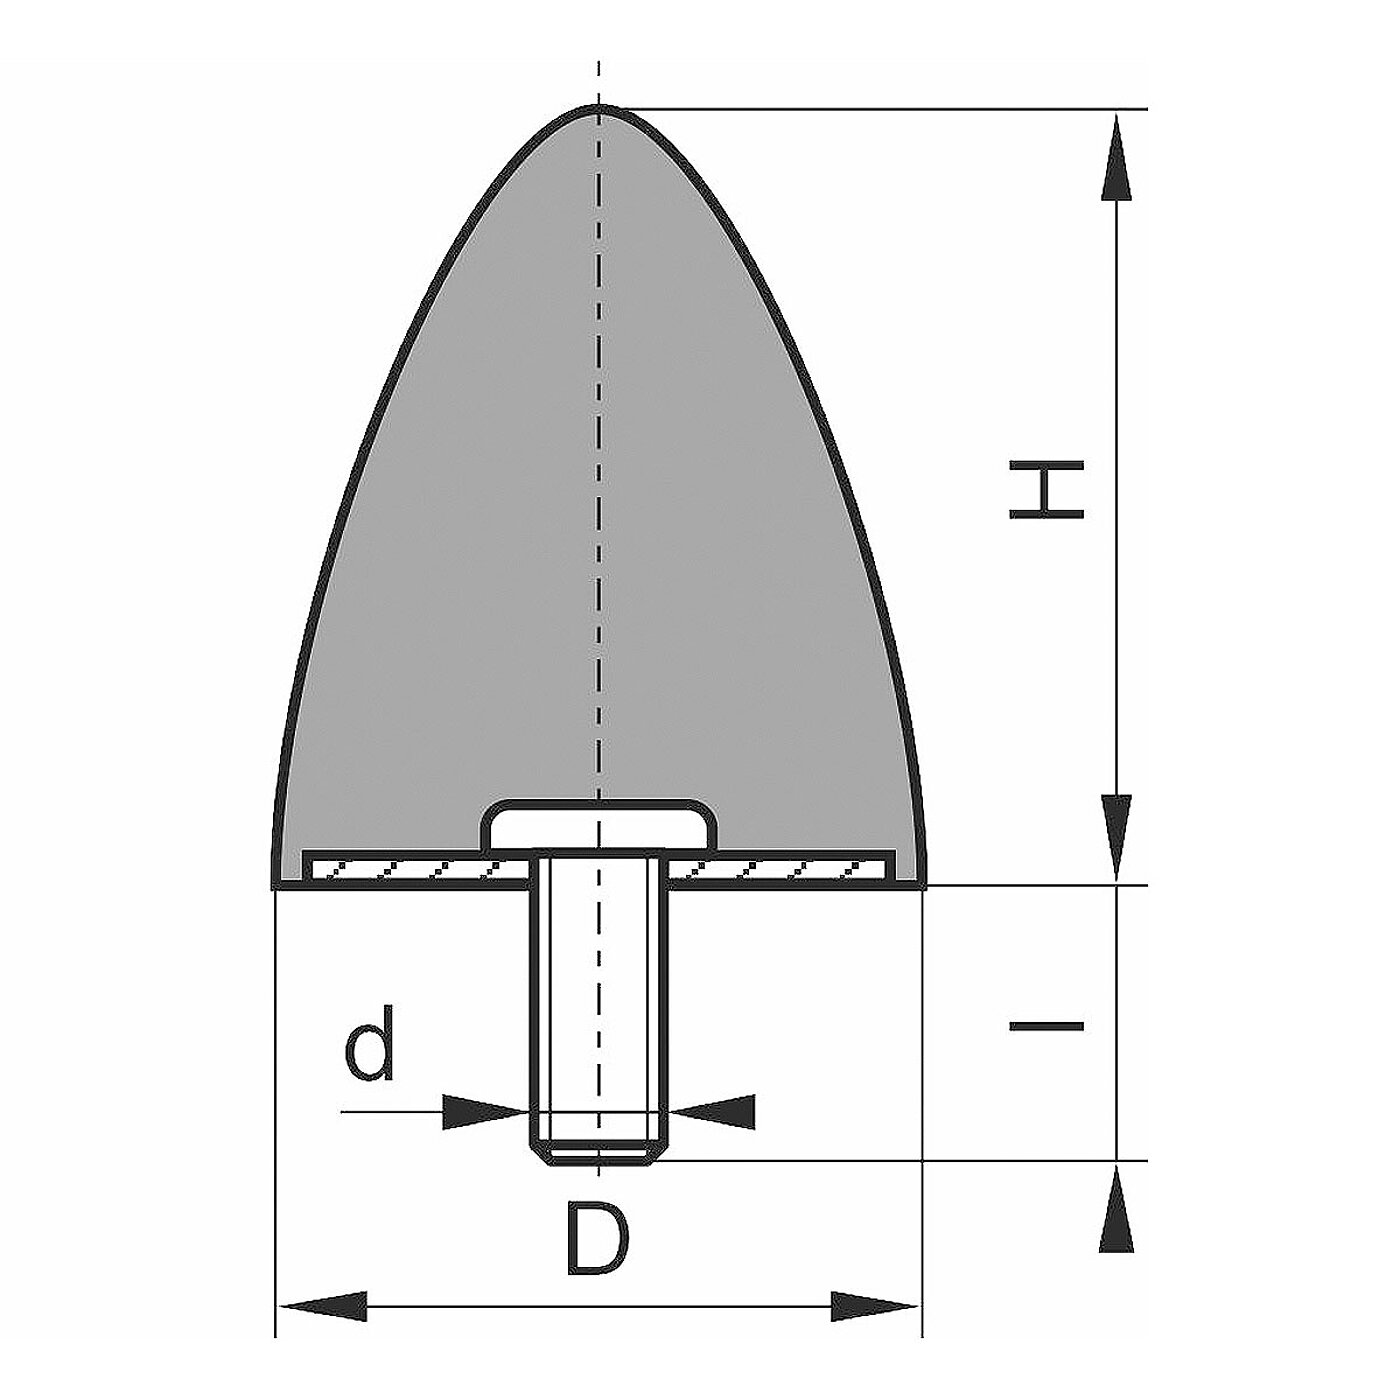 schematic drawing of a rubber-metal bearing with outer thread on one side and a parabolic elastomer corpus